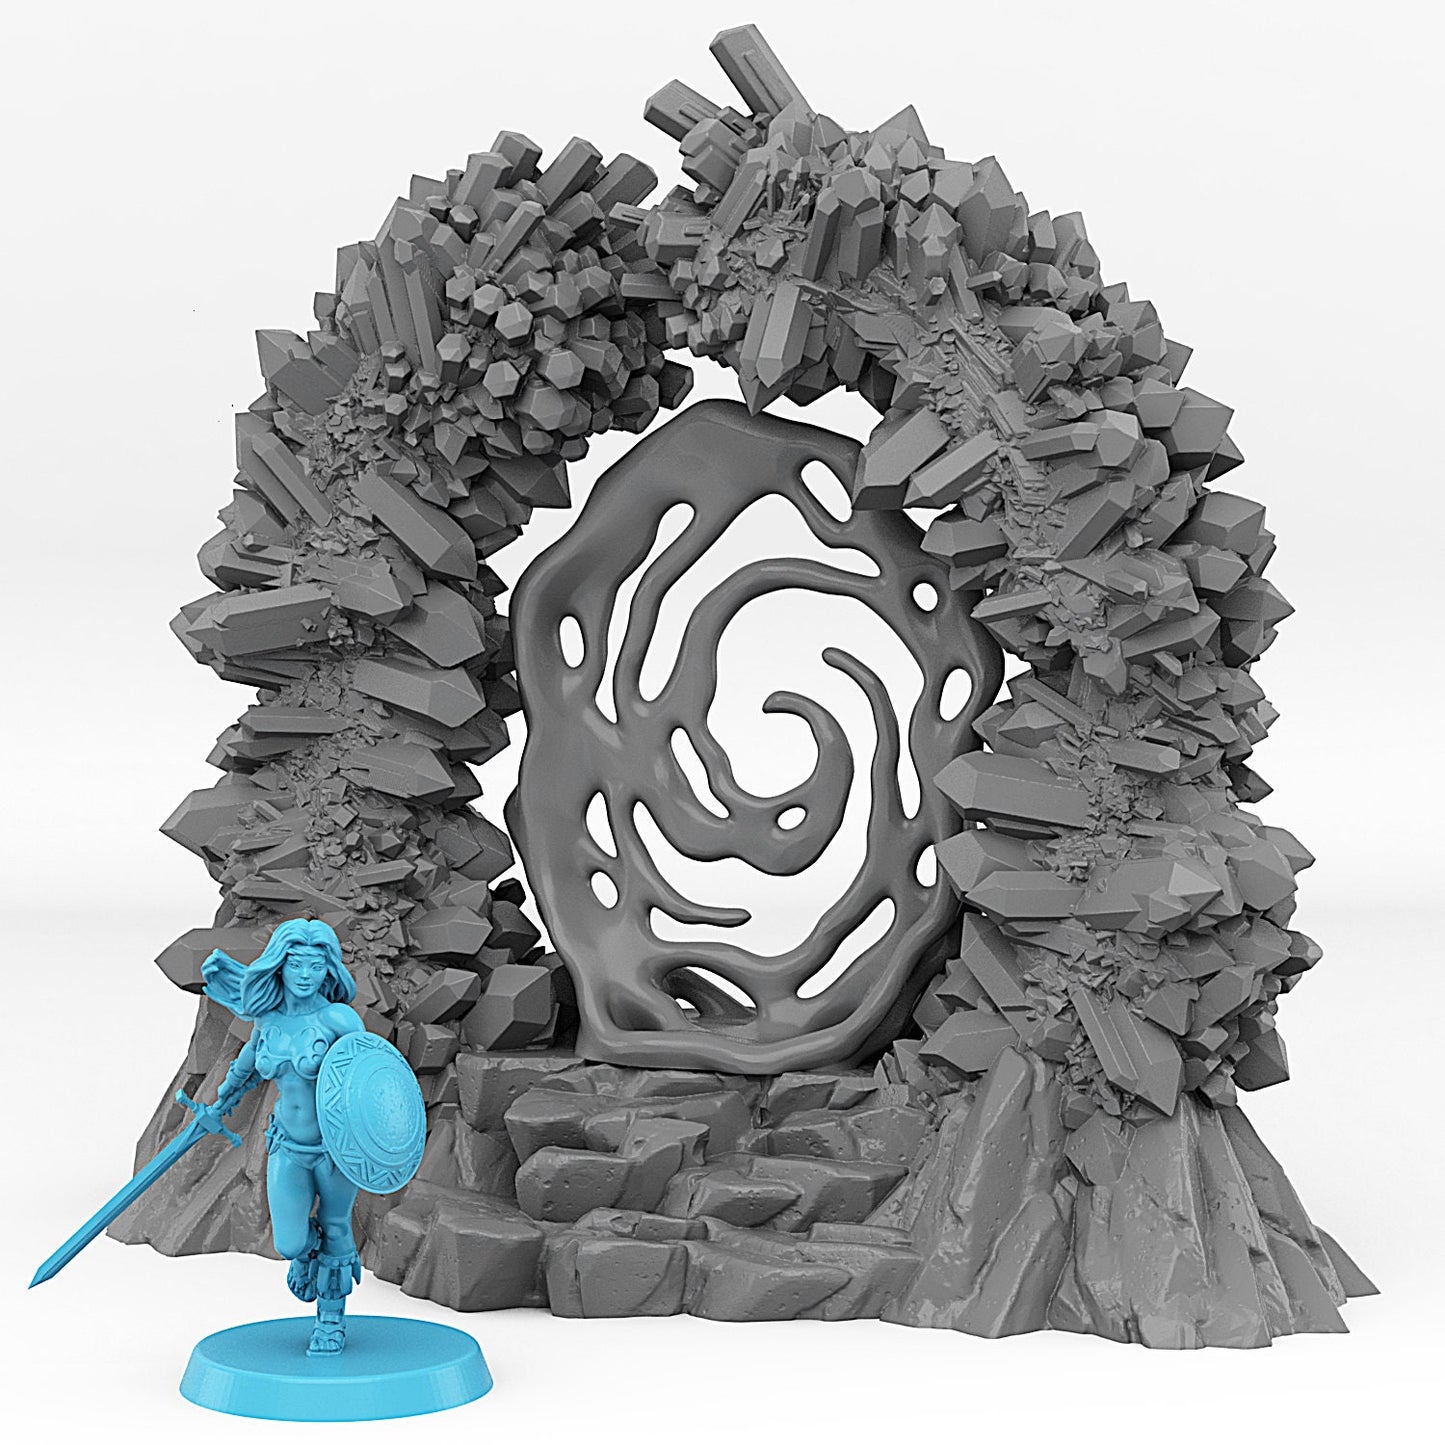 Crystal Portal | Scenery and terrain | 3D Printed Resin Miniature | Tabletop Role Playing | AoS | D&D | 40K | Pathfinder